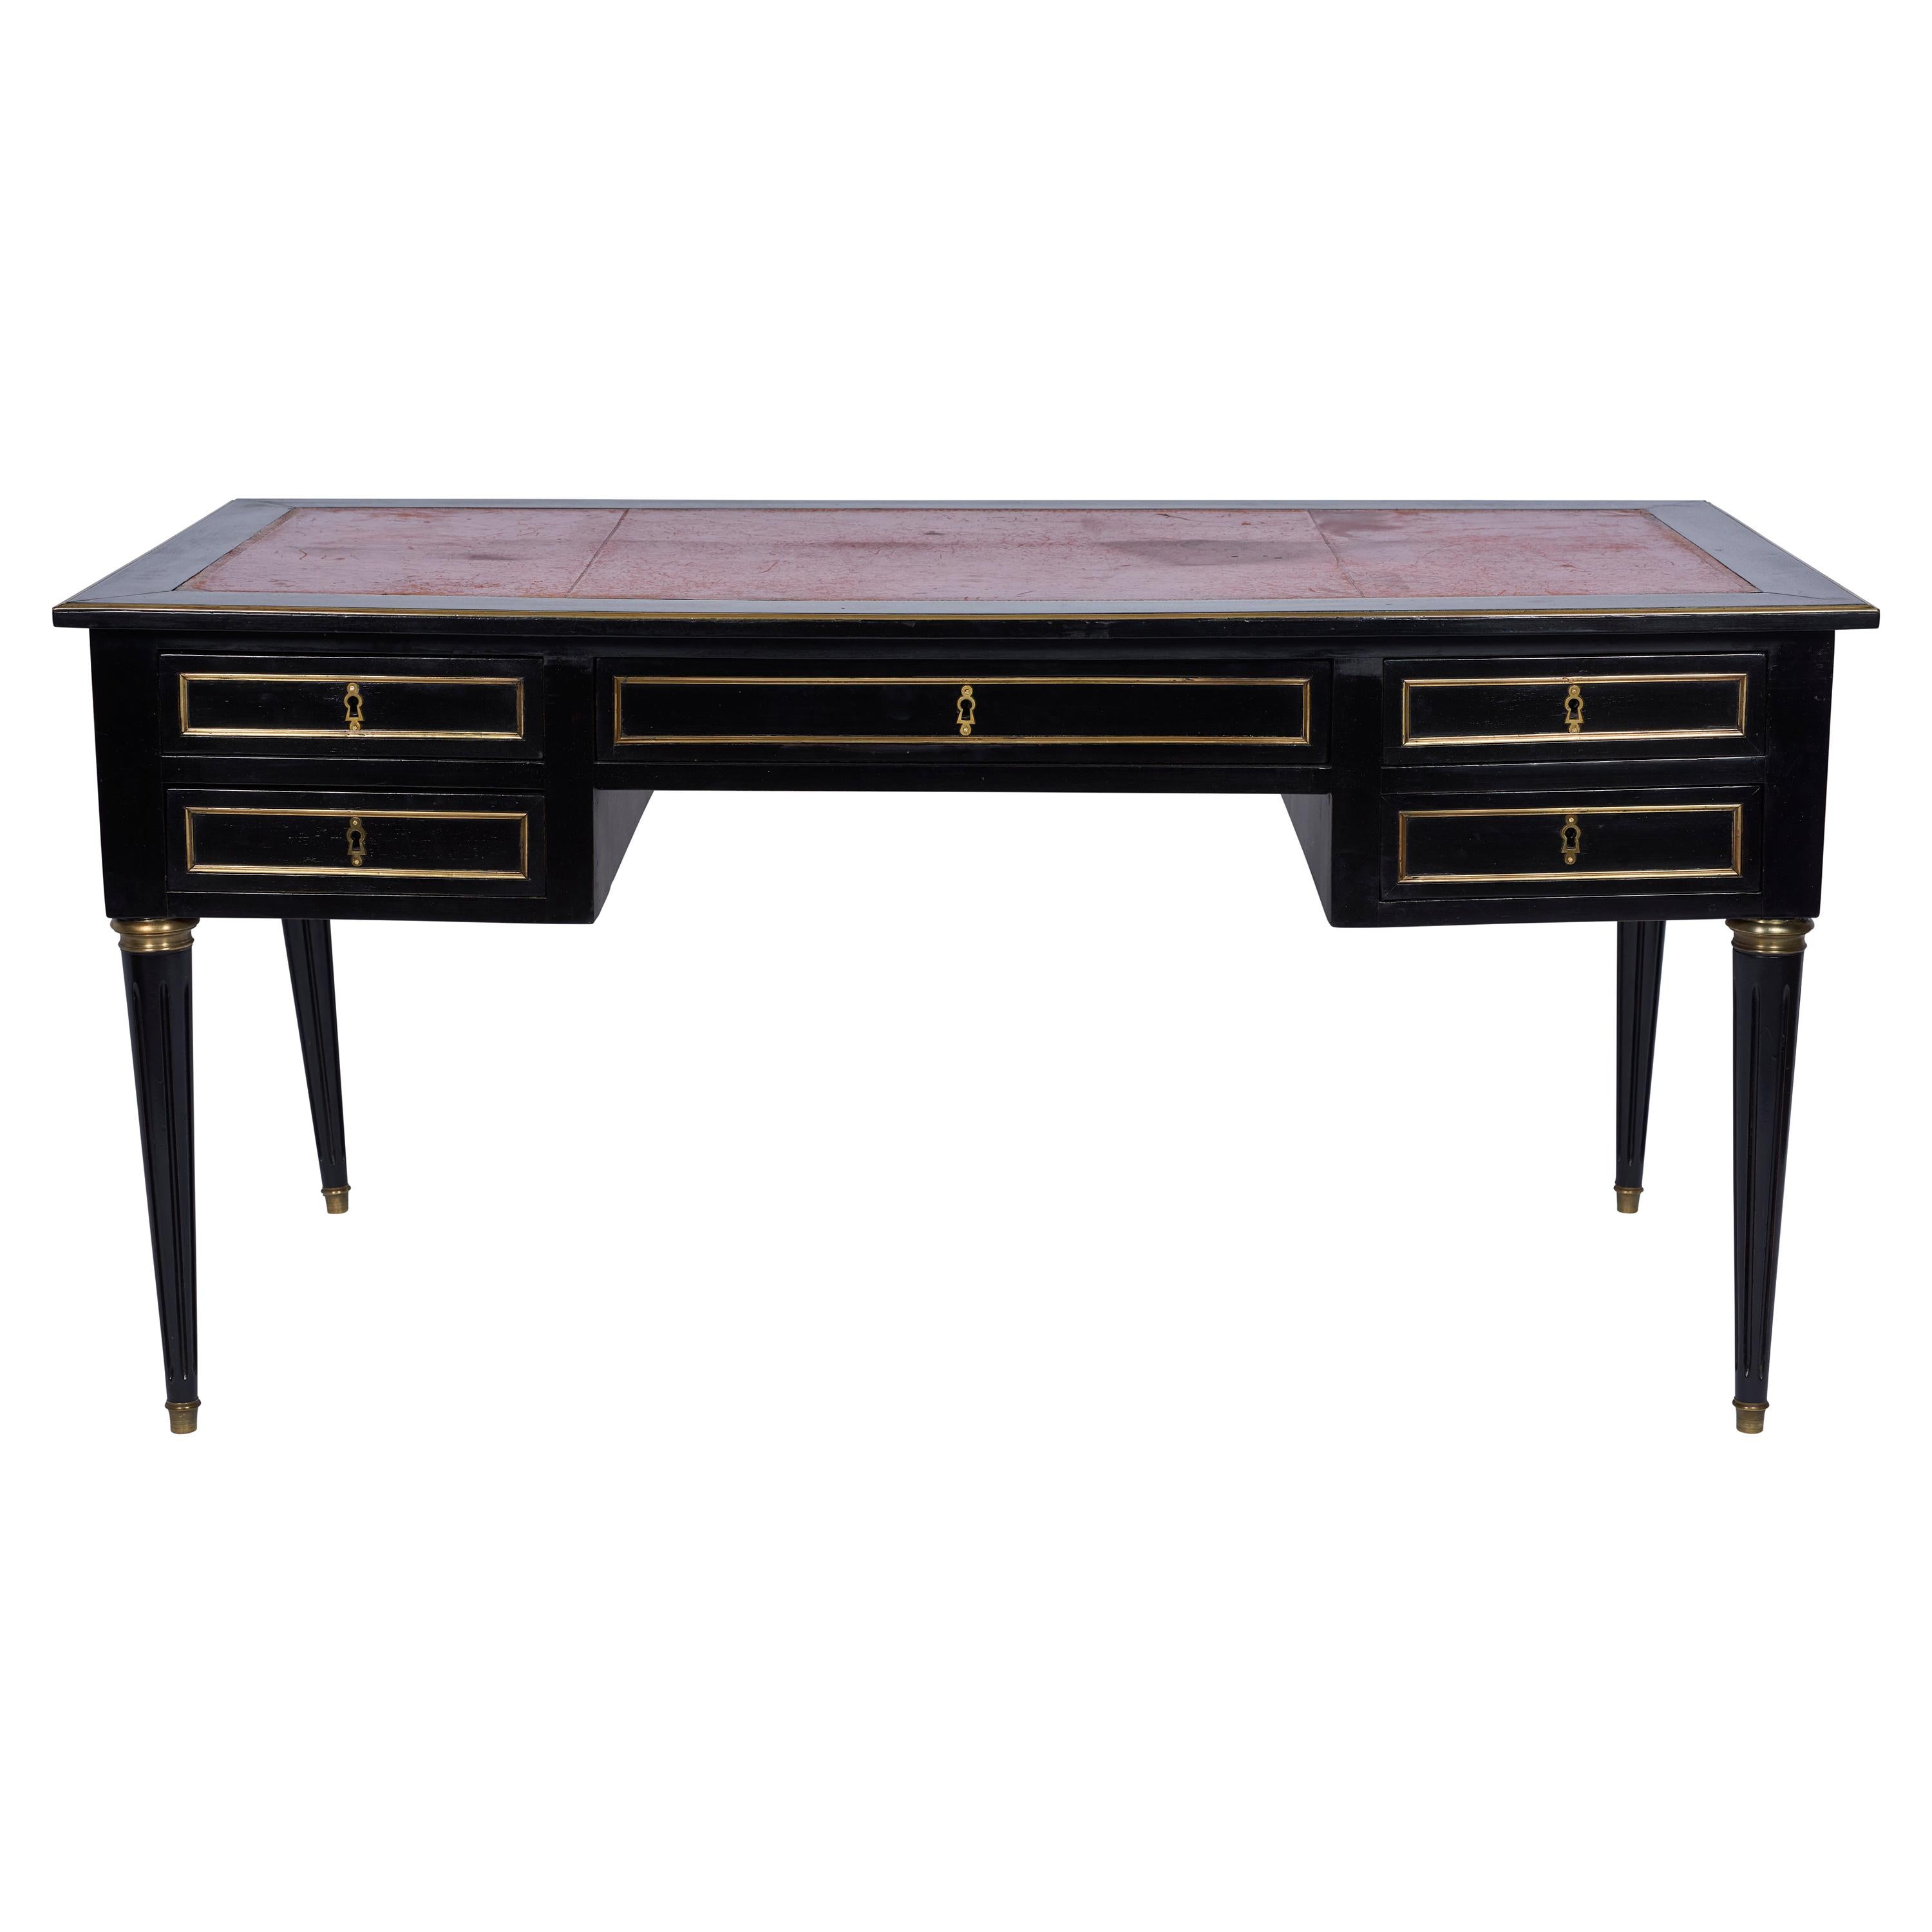 1920s French Directoire Style Desk